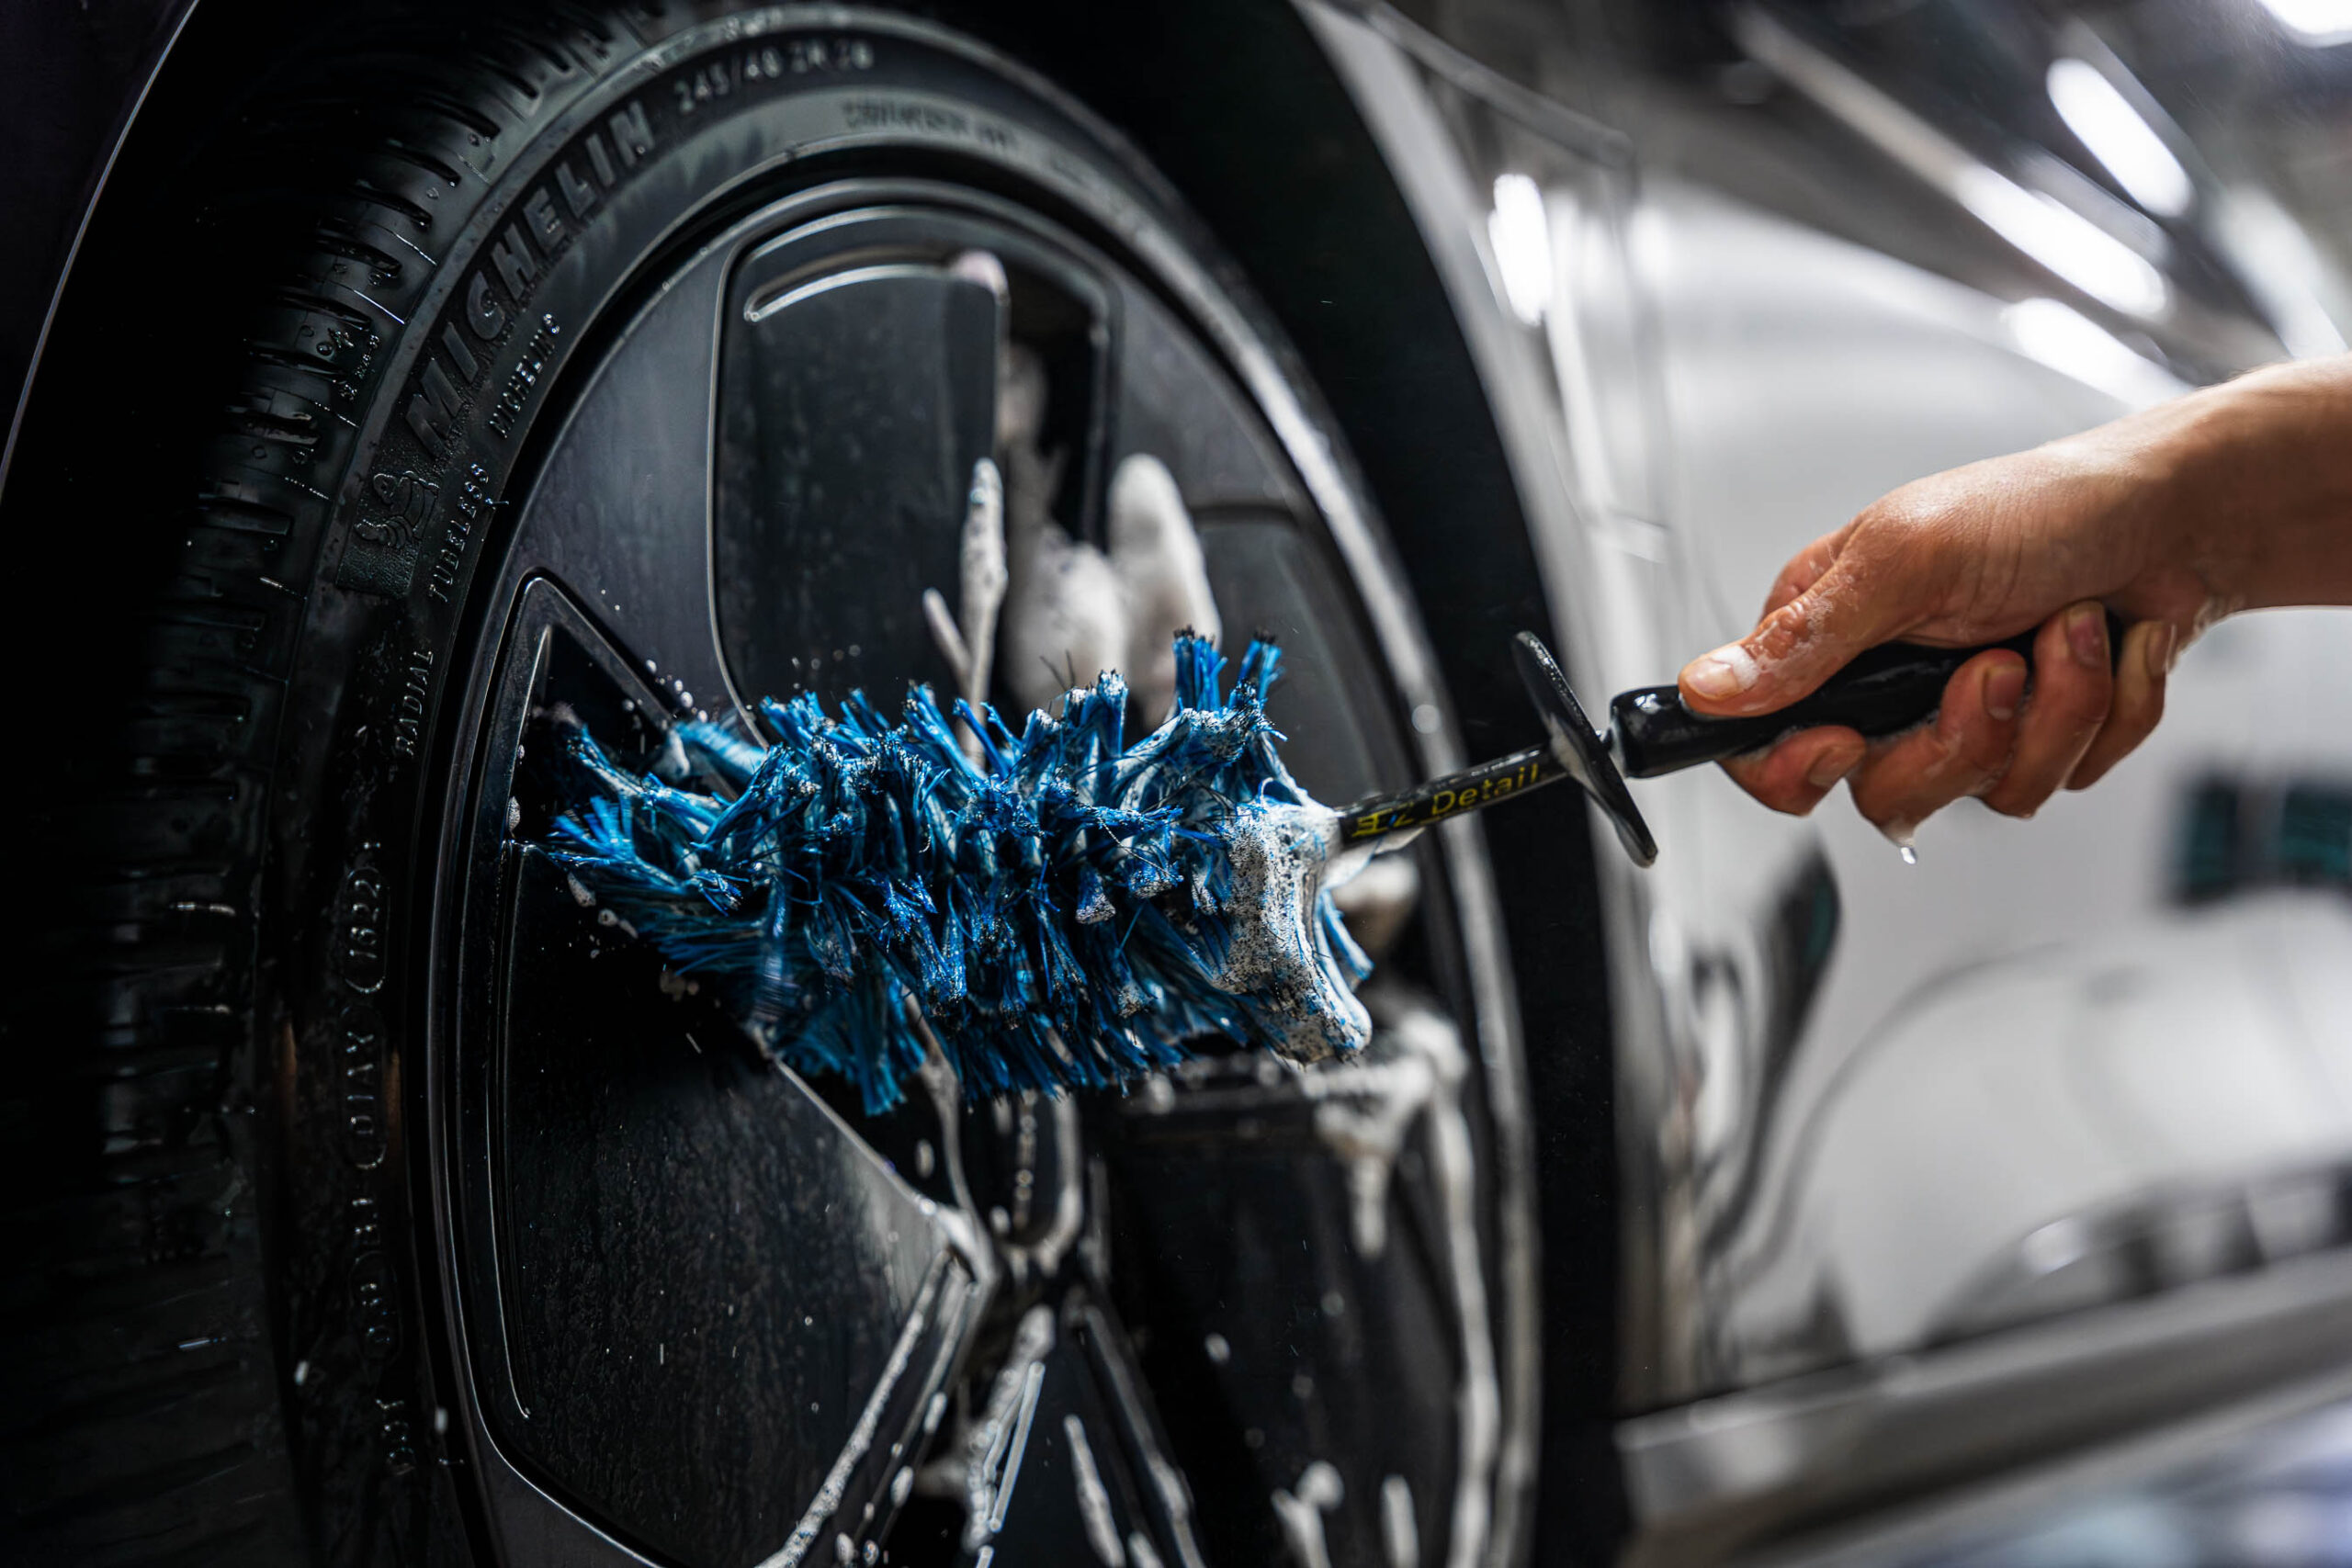 Using large brush to clean wheels